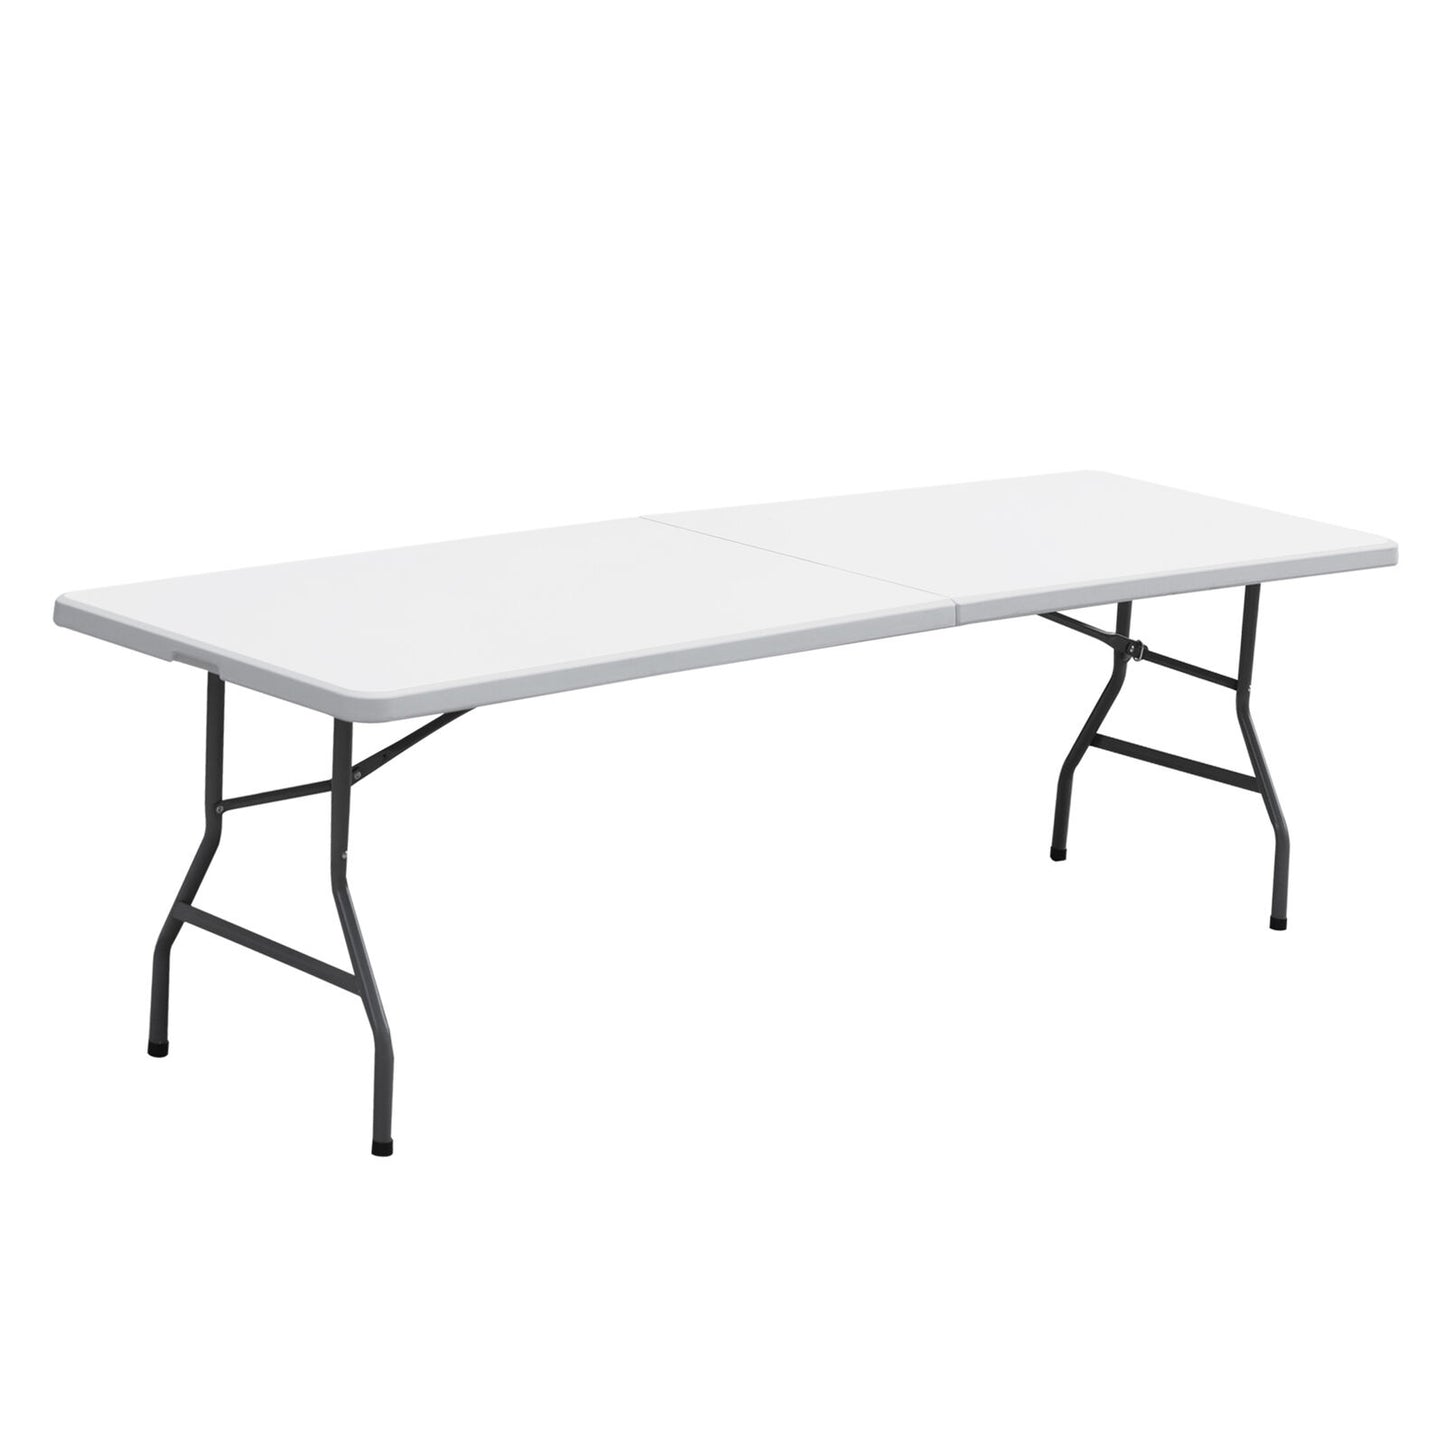 8' Portable Plastic Folding Table Fold-in-Half for Camping Picnic W/Handle White